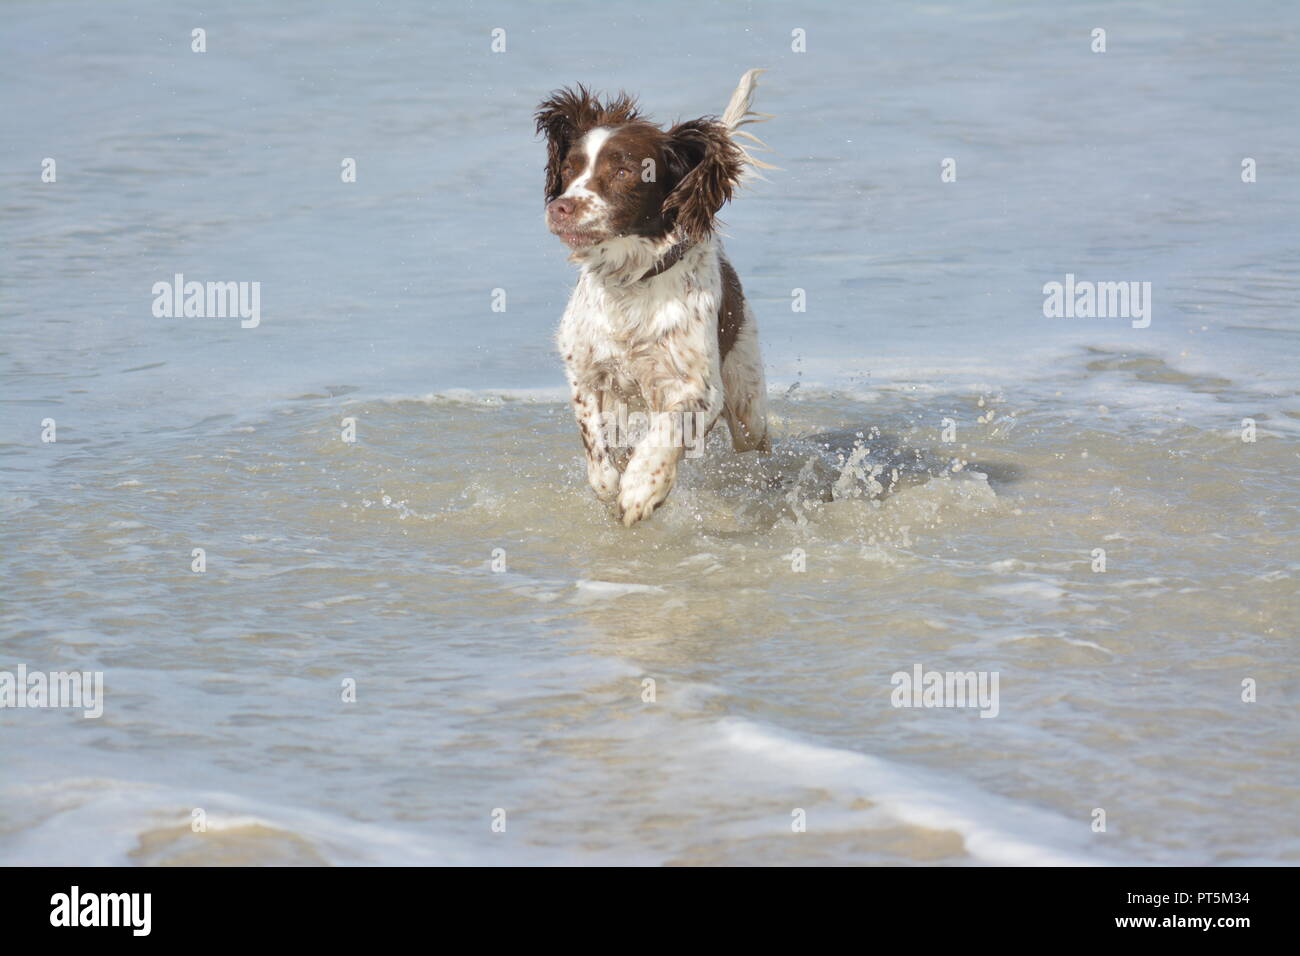 Liver and white English Springer Spaniel playing in the sea and leaping forwards over tiny waves re exercising dogs and playful pets Stock Photo